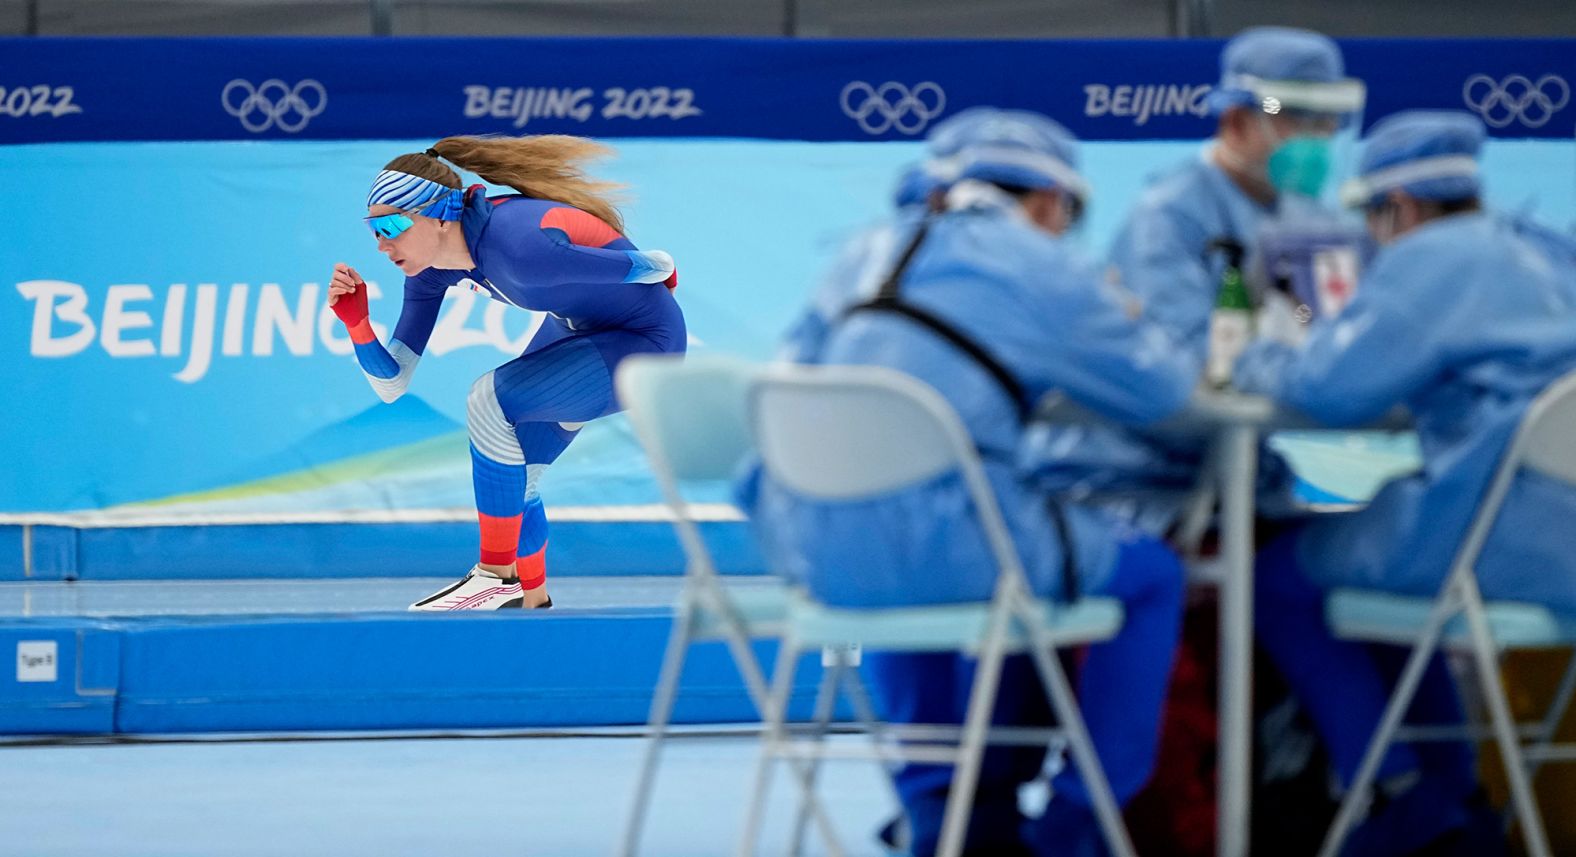 Russian speedskater Elena Sokhryakova skates past medical personnel as she warms up for the 1,500 meters on February 7.